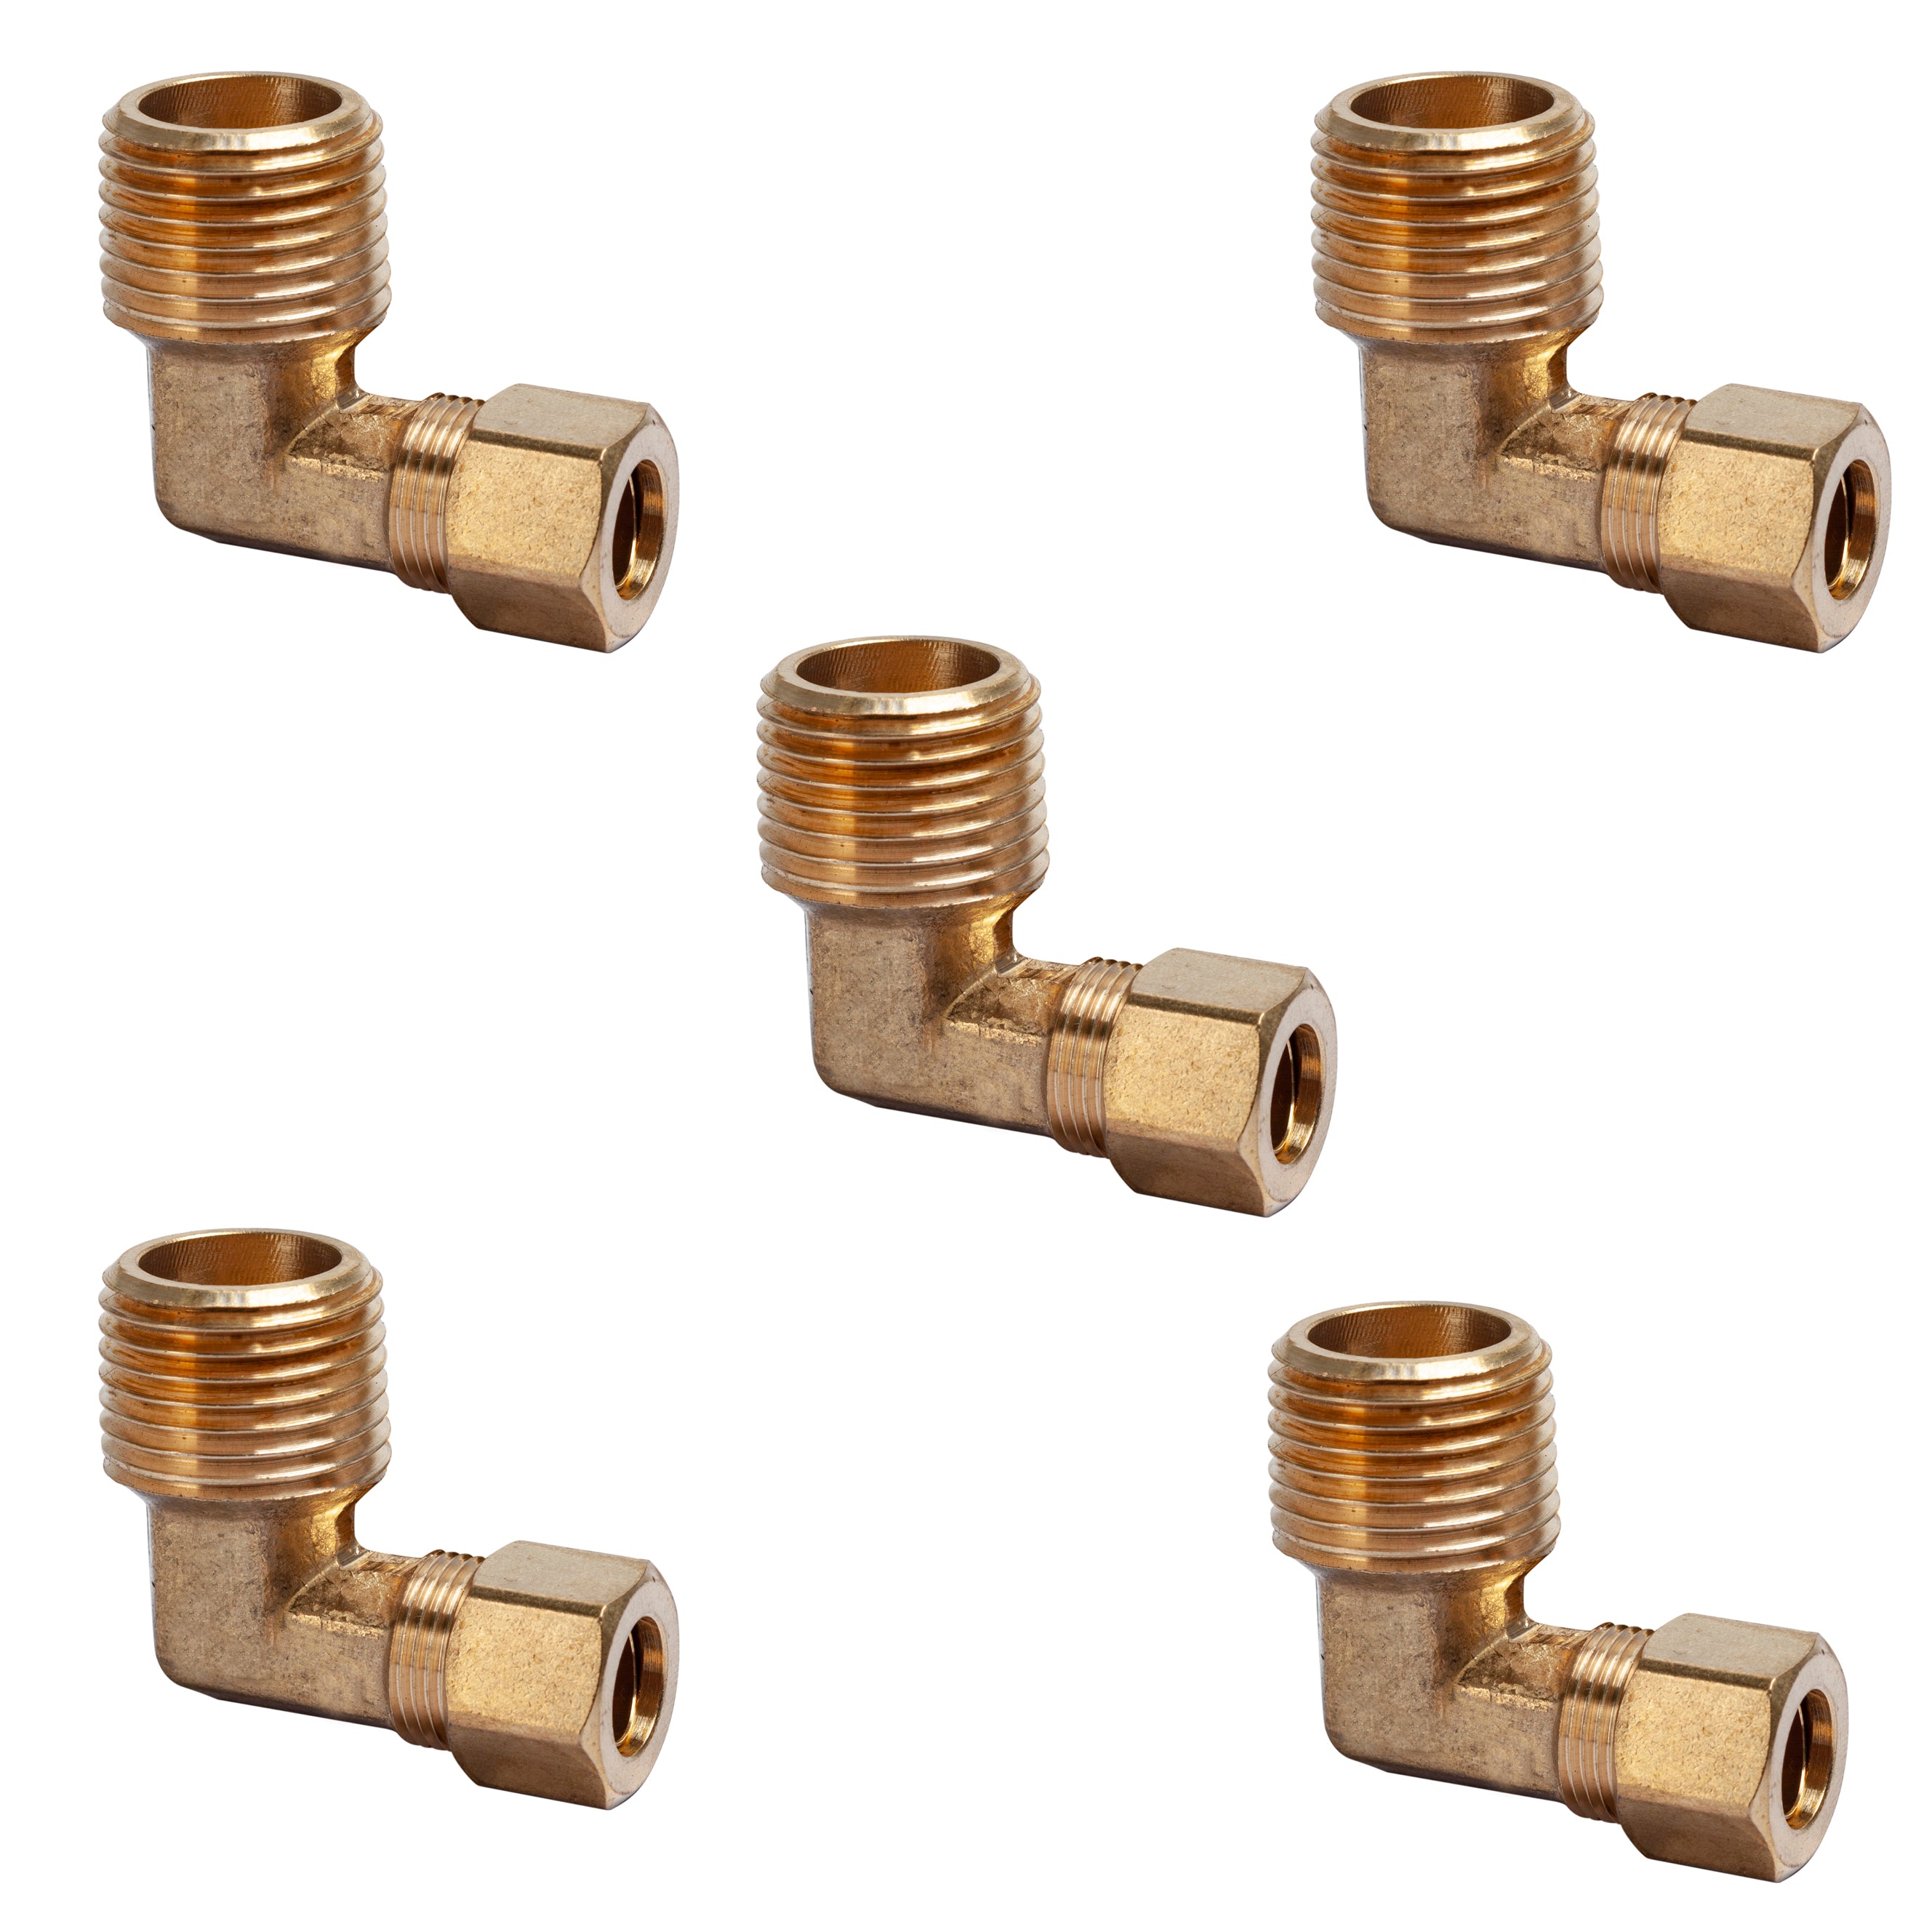 LTWFITTING Brass 5/16-Inch OD x 3/8-Inch Male NPT Compression Connector  Fitting(Pack of 5)